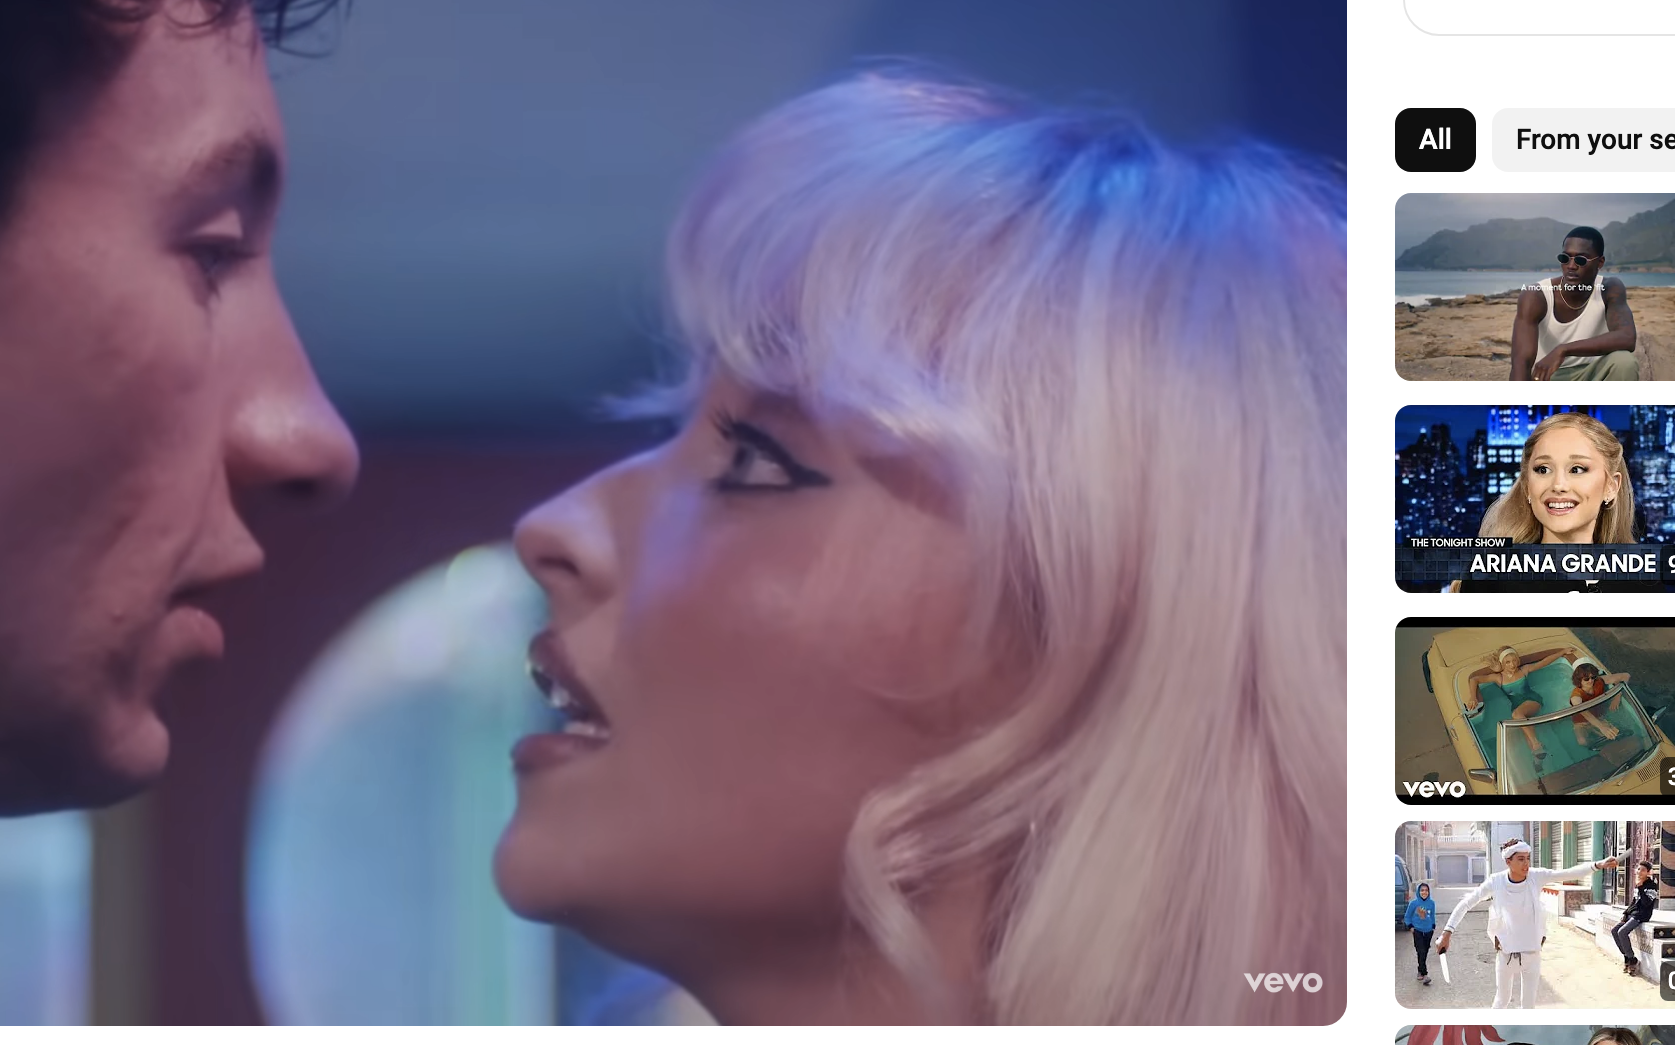 Sabrina Carpenter and Barry Keoghan share a close moment face-to-face in a scene from her music video &quot;Please Please Please (Official Video)&quot; on YouTube